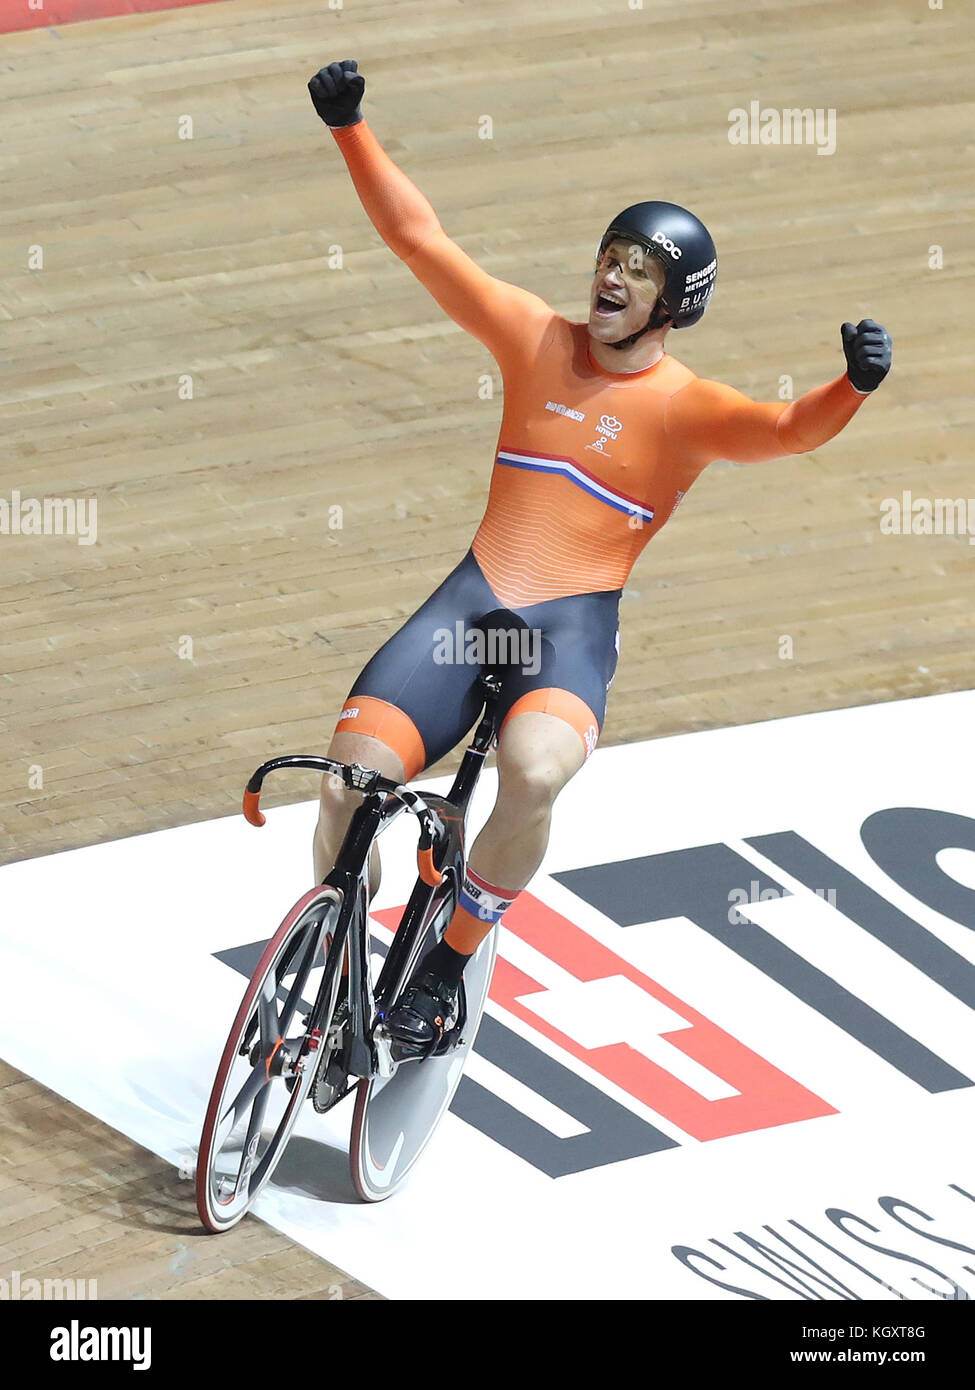 Netherlands Harrie Lavreysen Celebrates Winning The Men S Sprint Final During Day Two Of The Tissot Uci Track Cycling World Cup At The Hsbc Uk National Cycling Centre Manchester Stock Photo Alamy